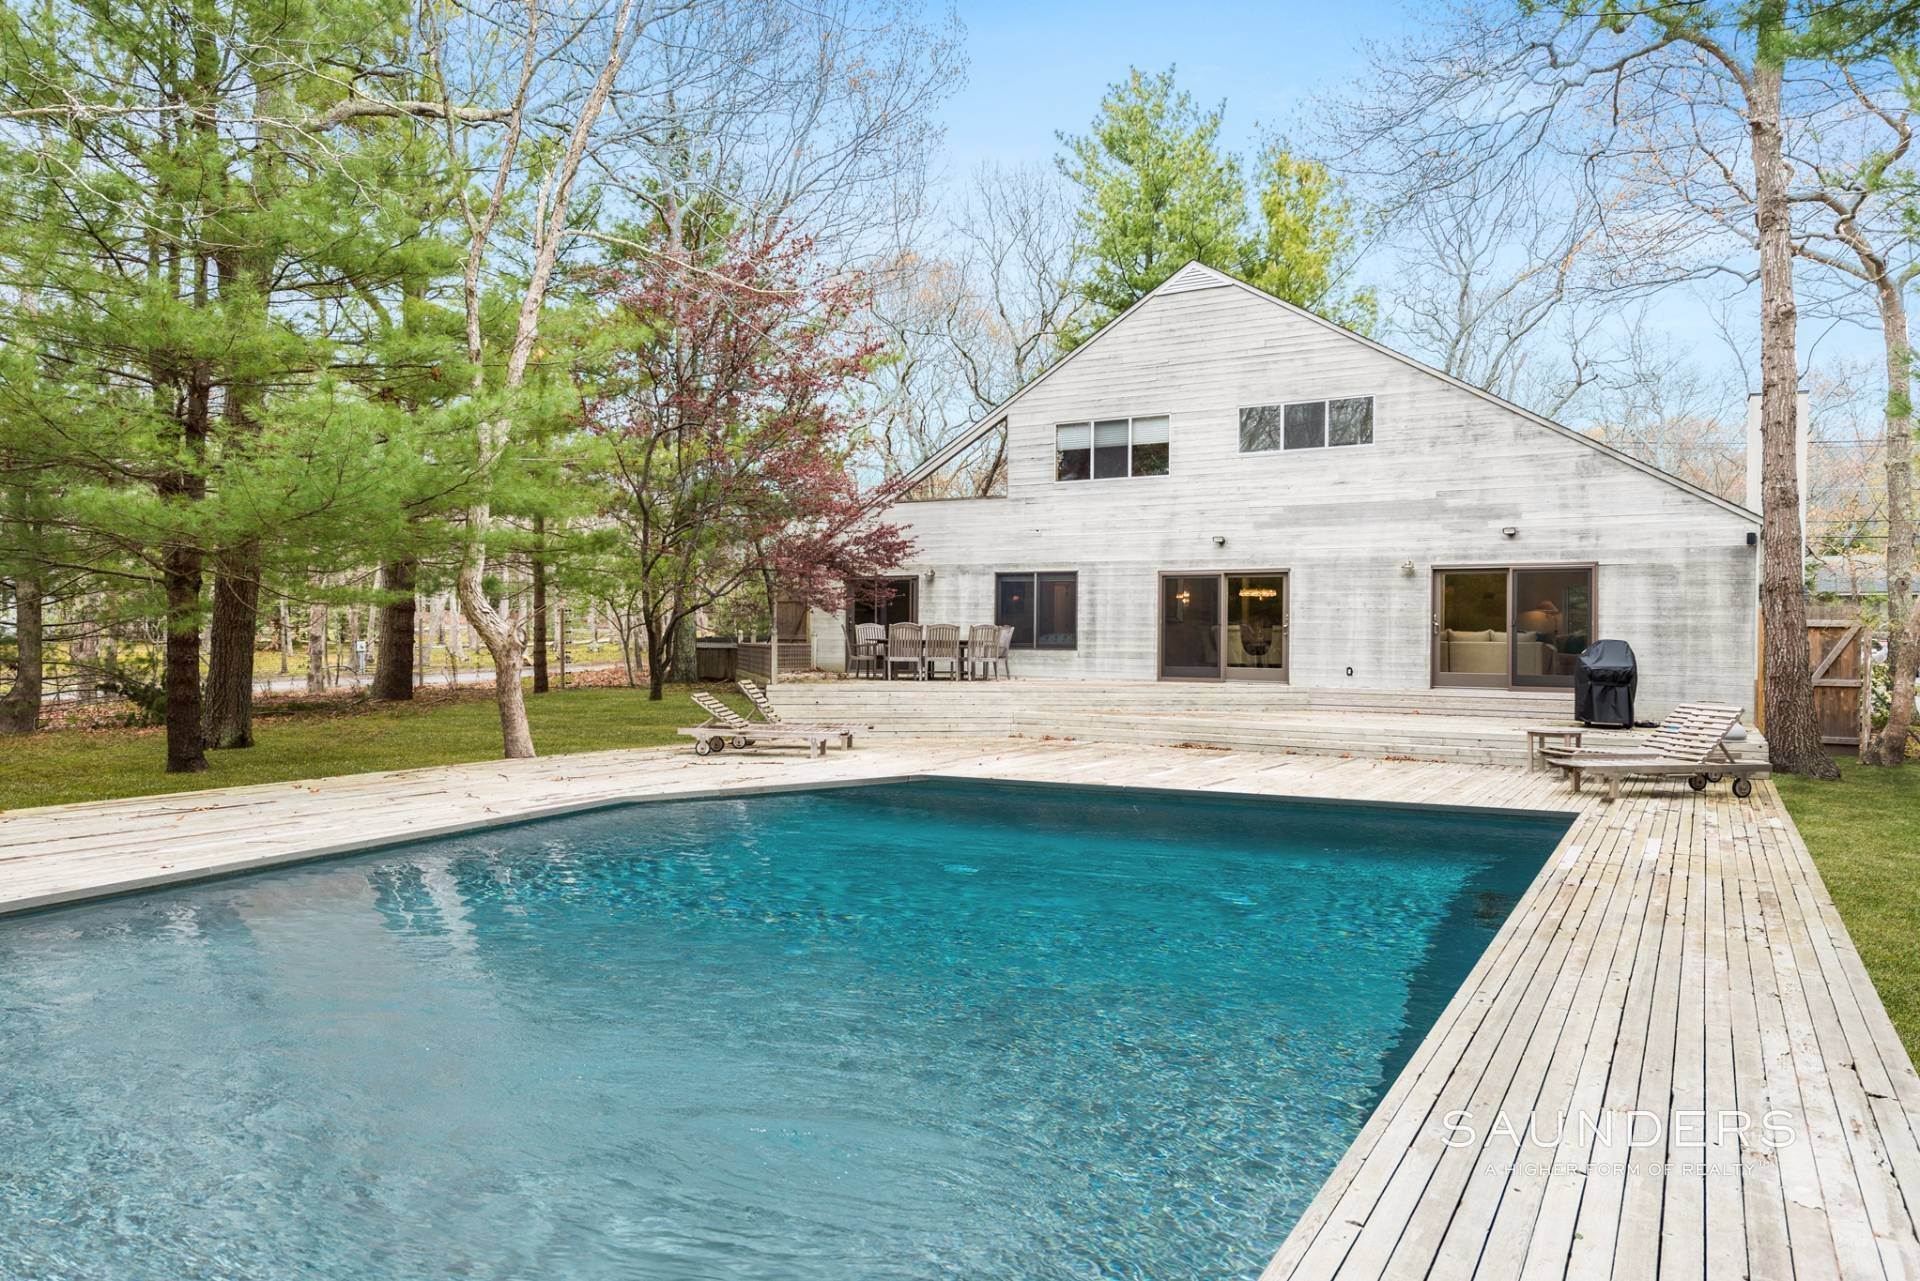 Single Family Homes at Come & Stay For Fall! 15 Ely Brook Road, East Hampton, NY 11937